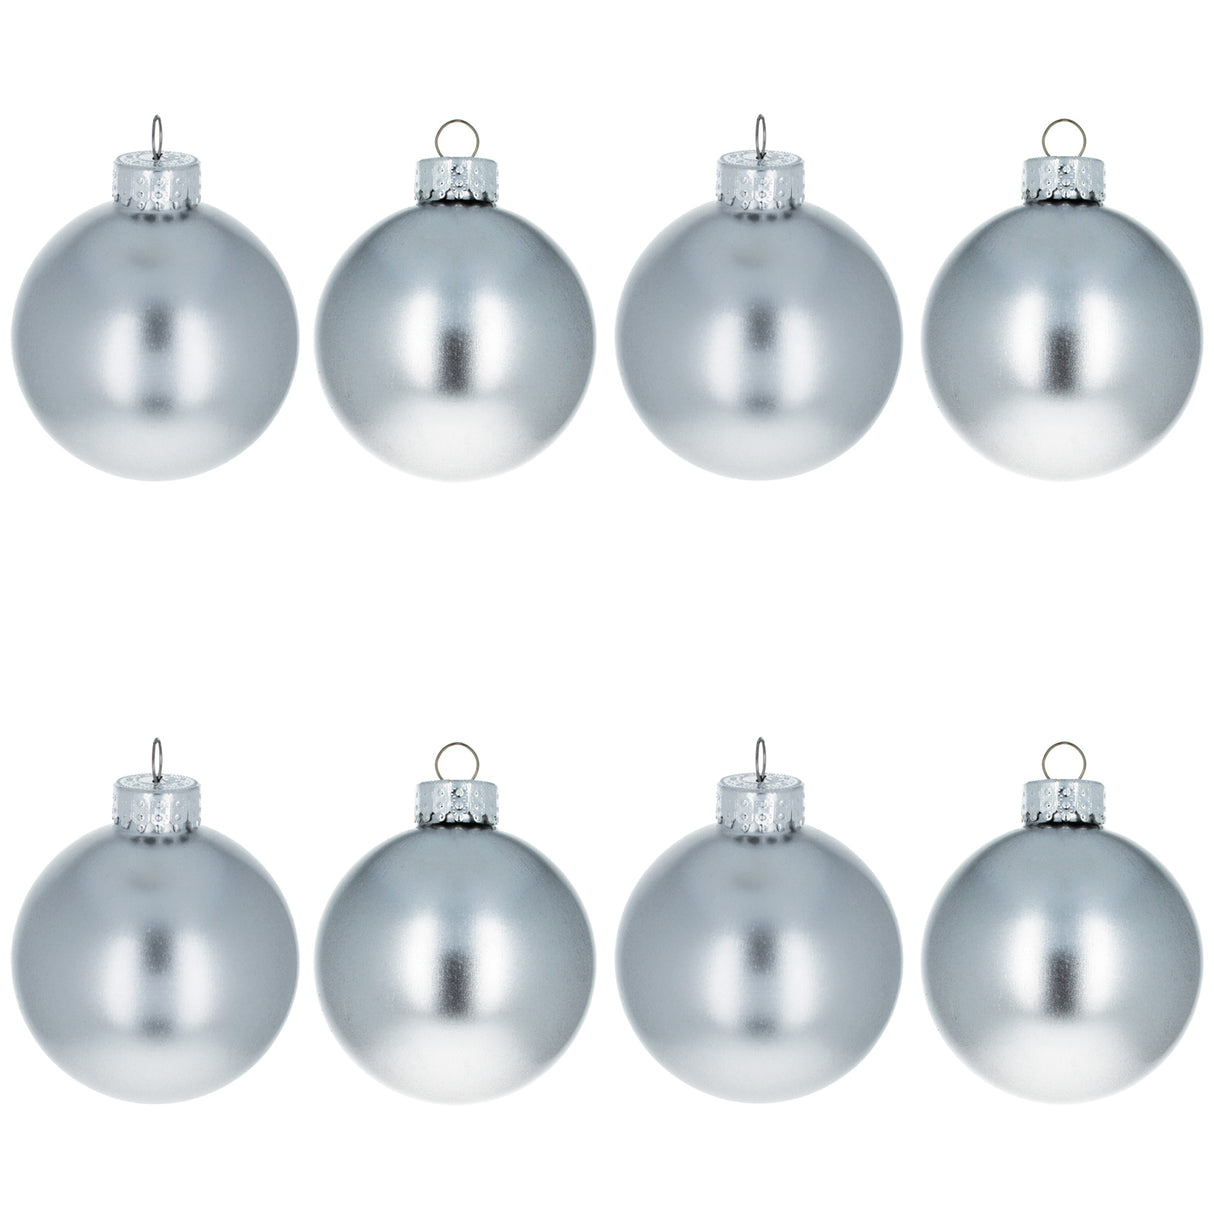 Set of 8 Shiny Silver Glass Christmas Ball Ornament DIY Craft 2.6 Inches in Silver color, Round shape